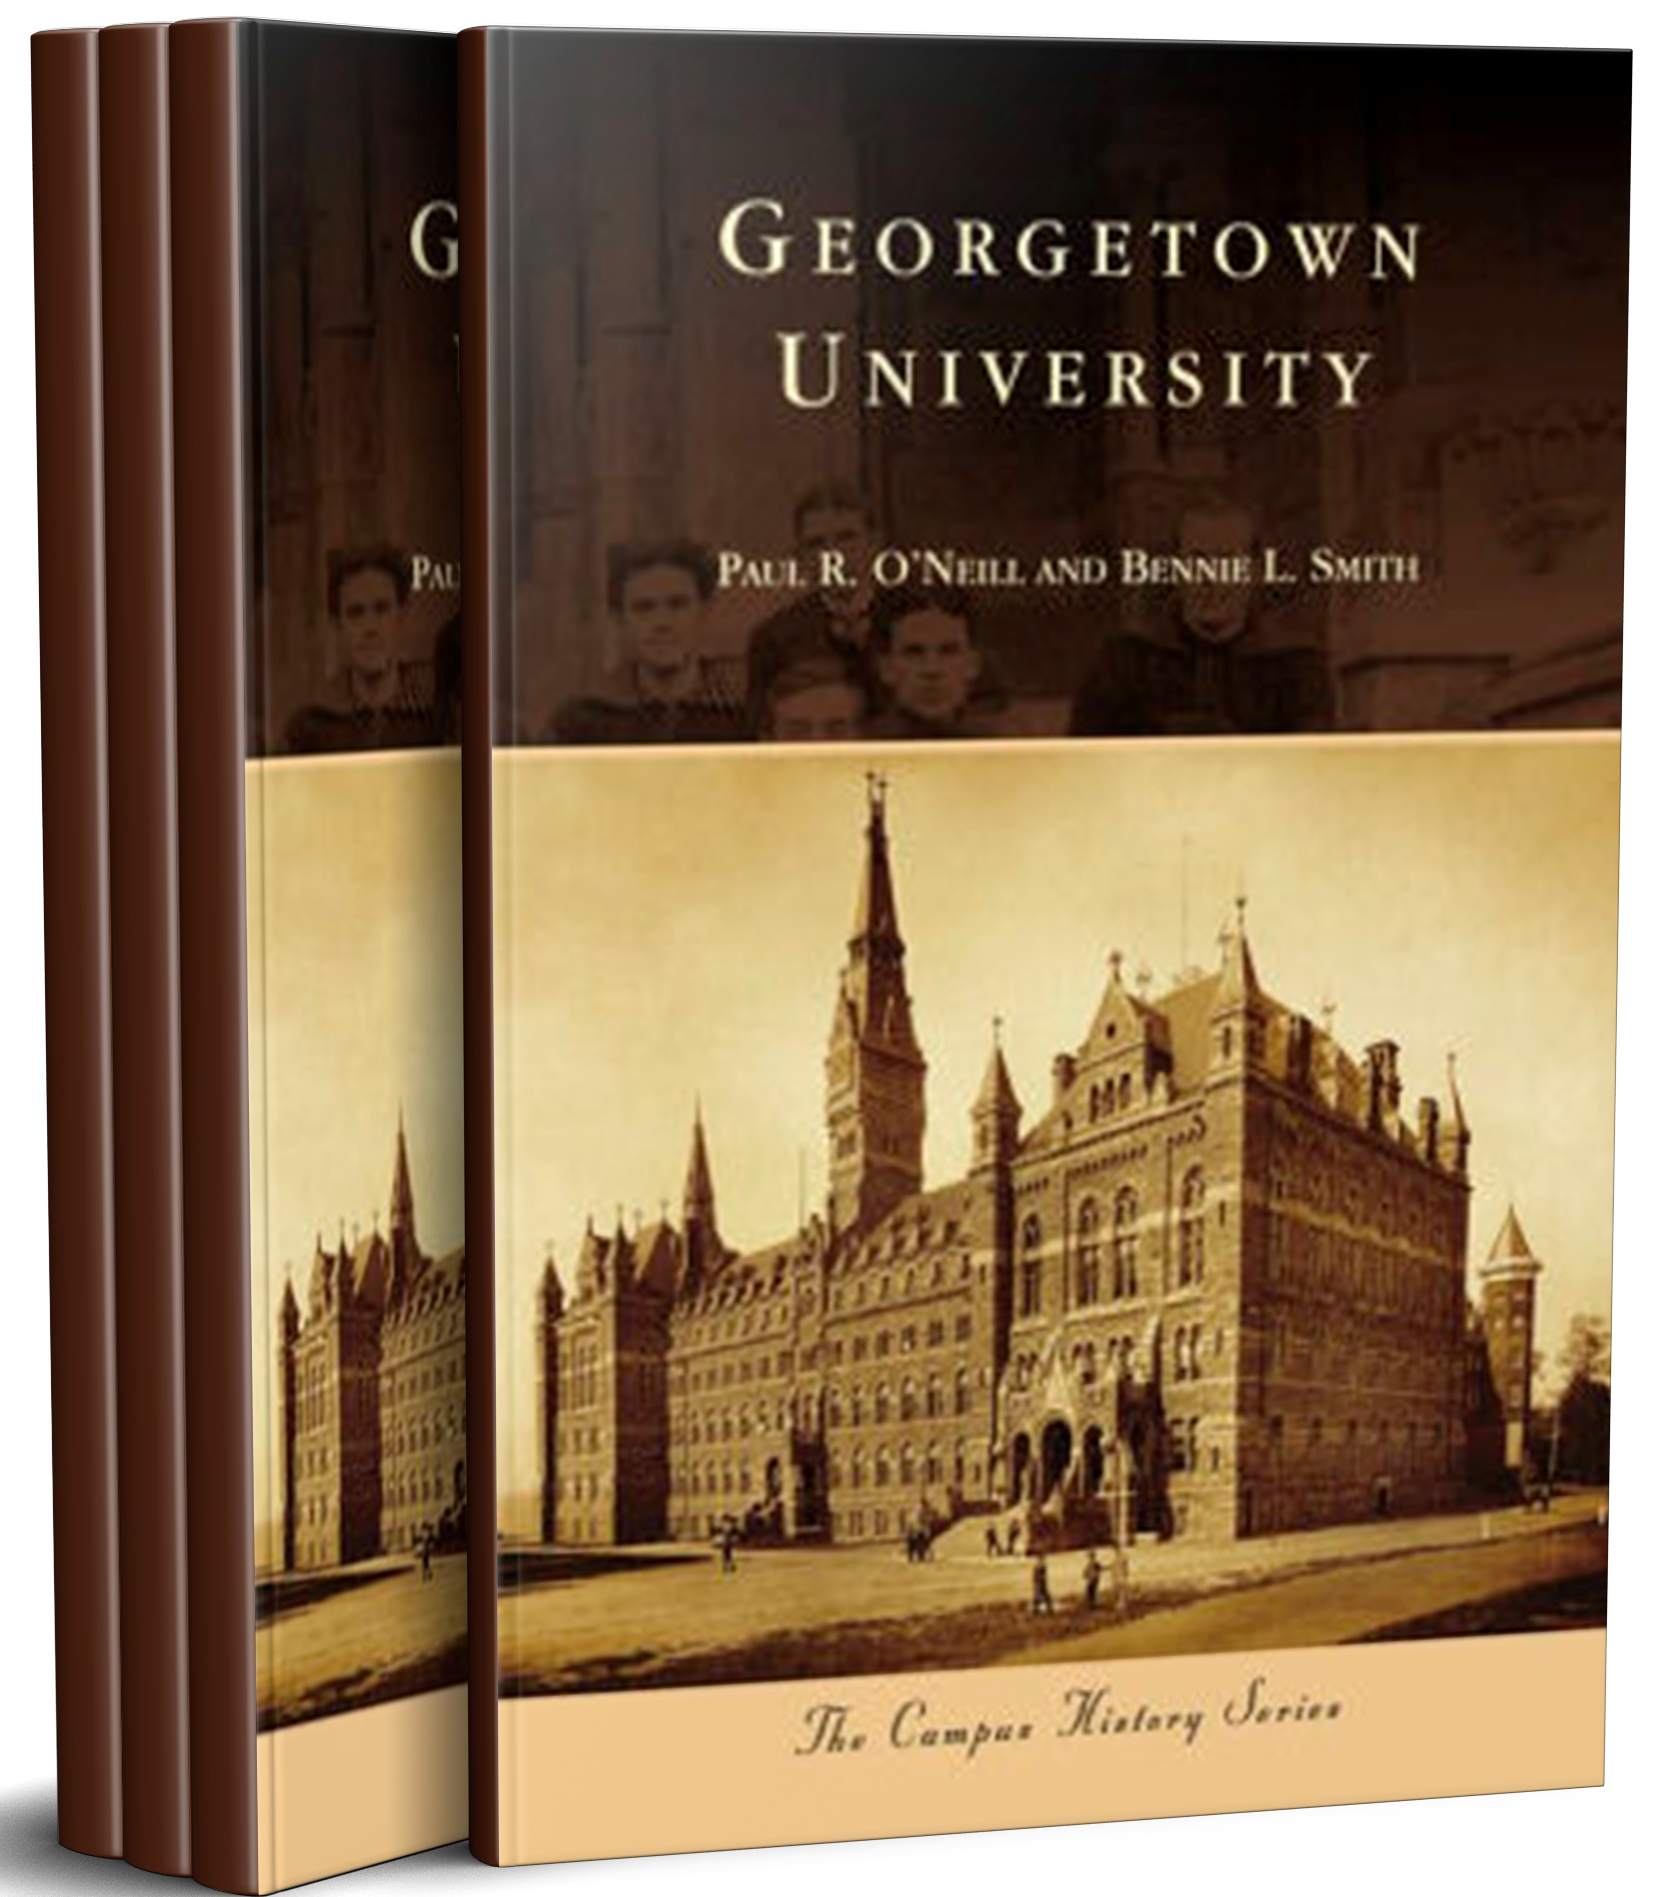 Georgetown University Book Cover